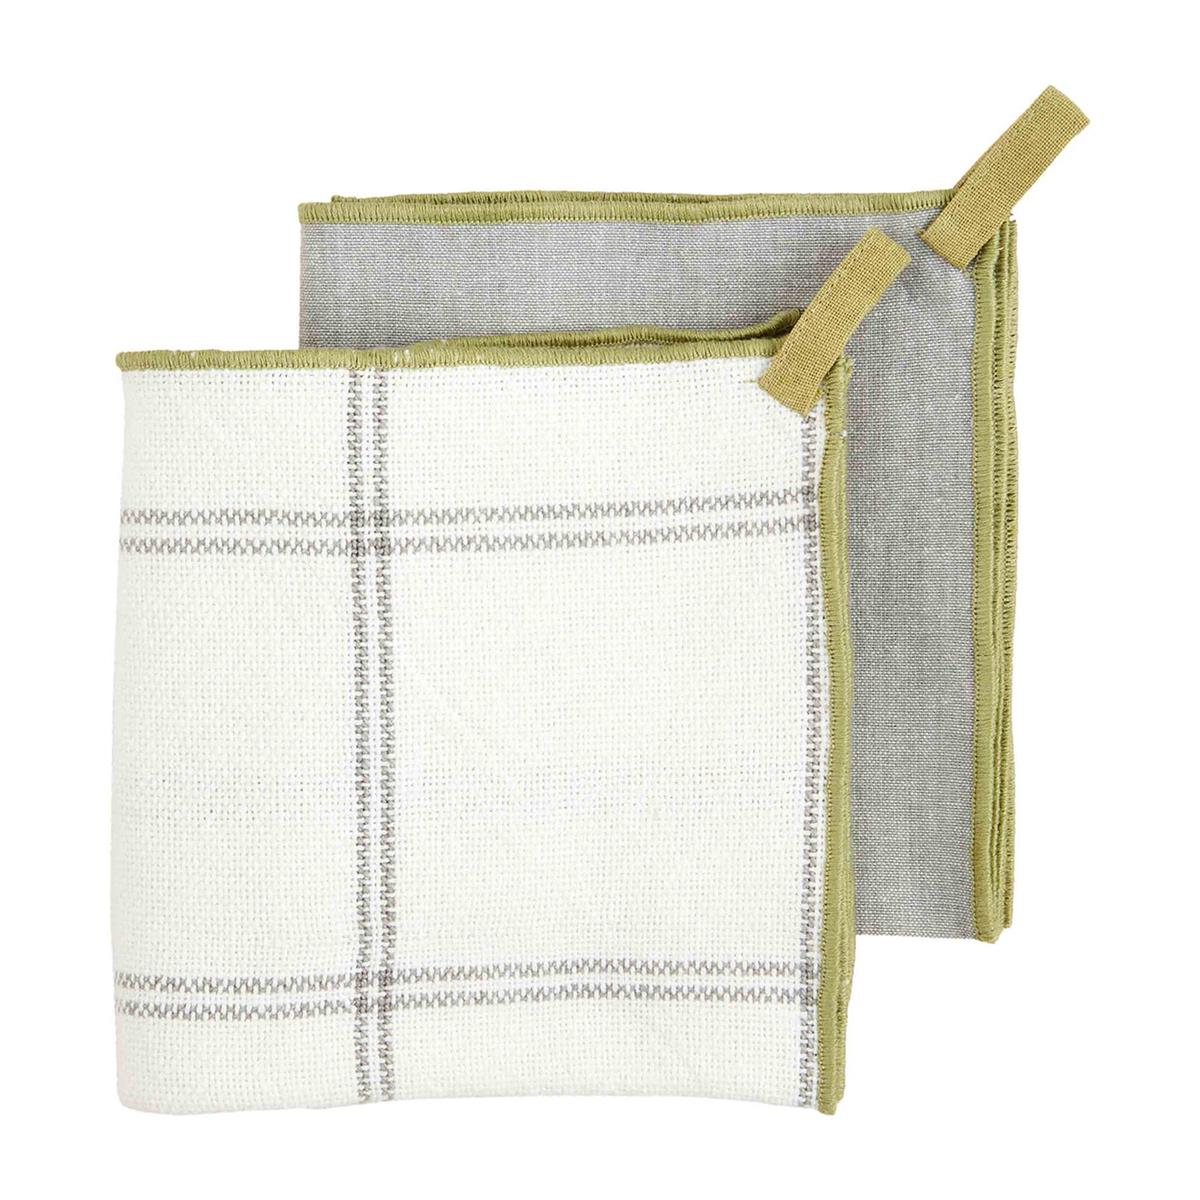 checked and solid gray, green  stitch edge towel set displayed on a white background